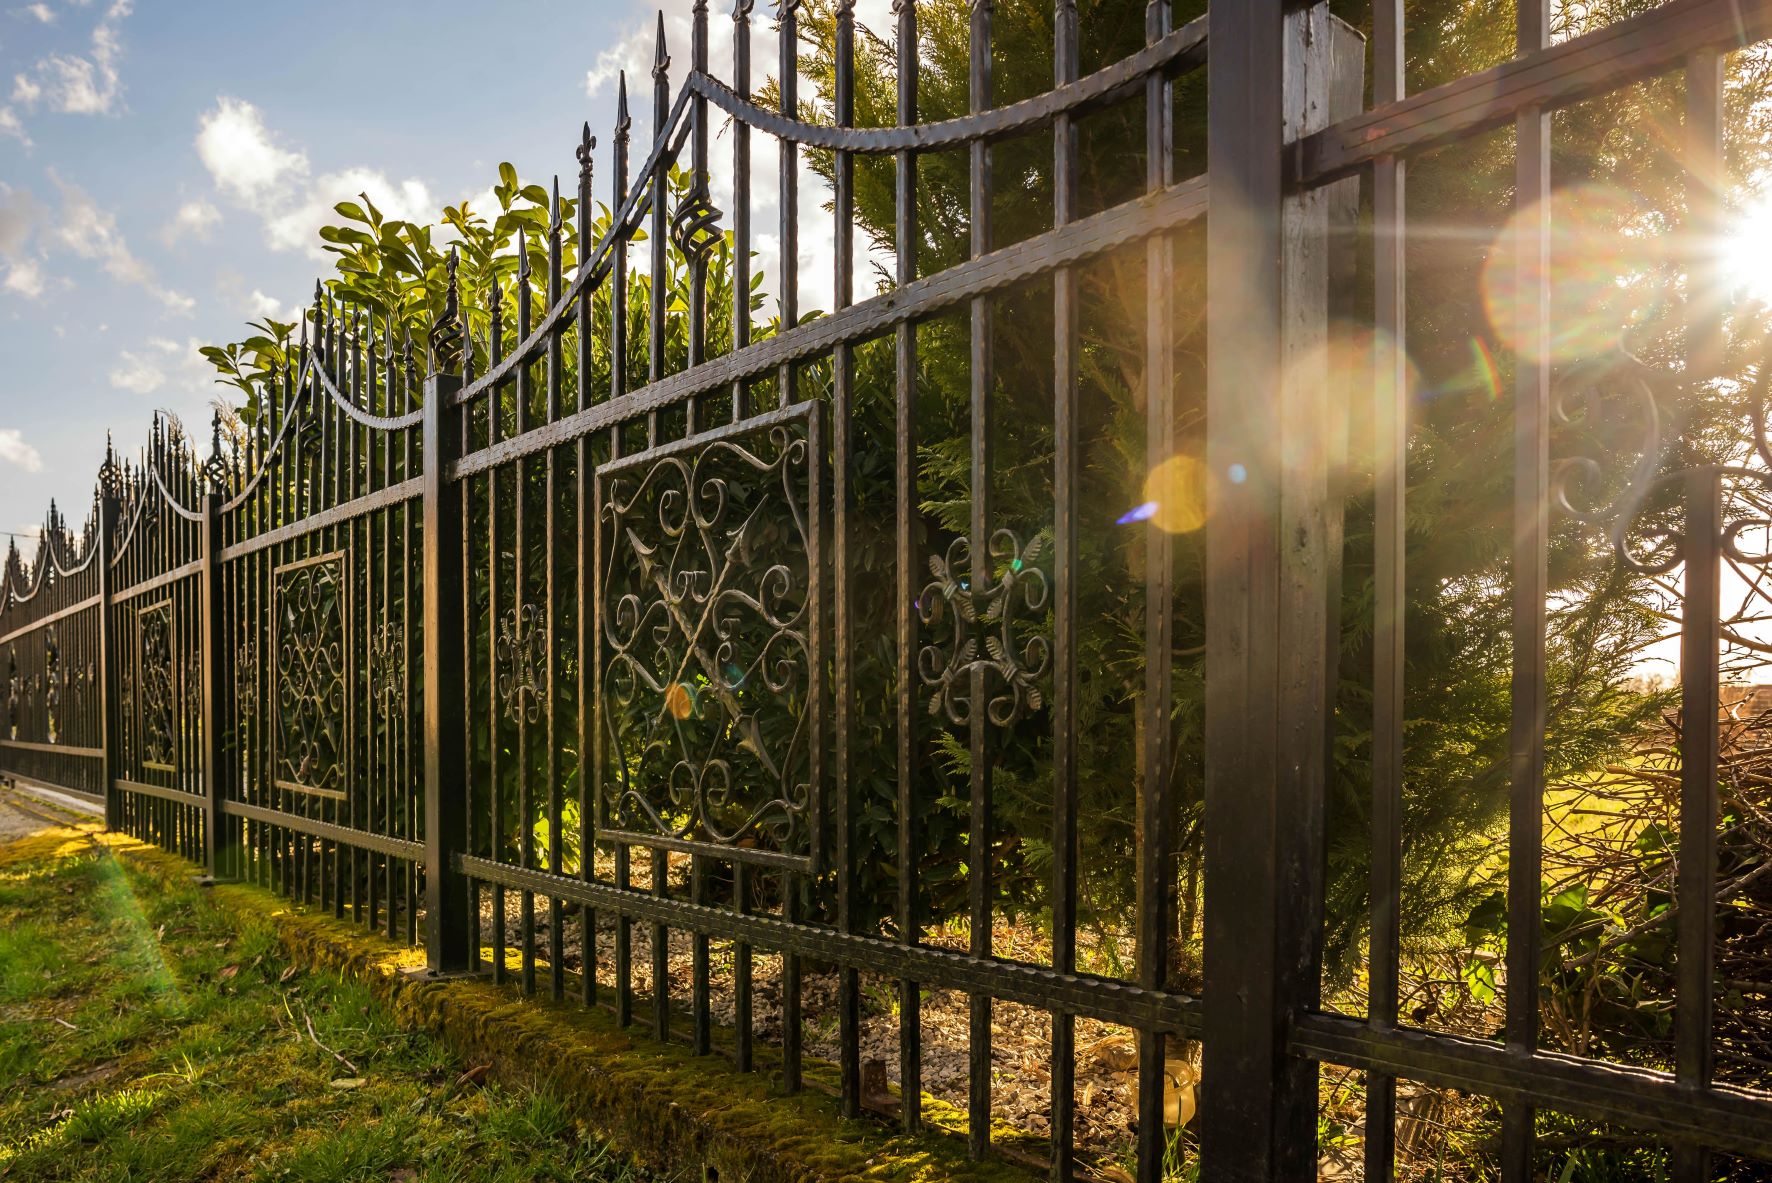 How To Protect a Wrought Iron Fence